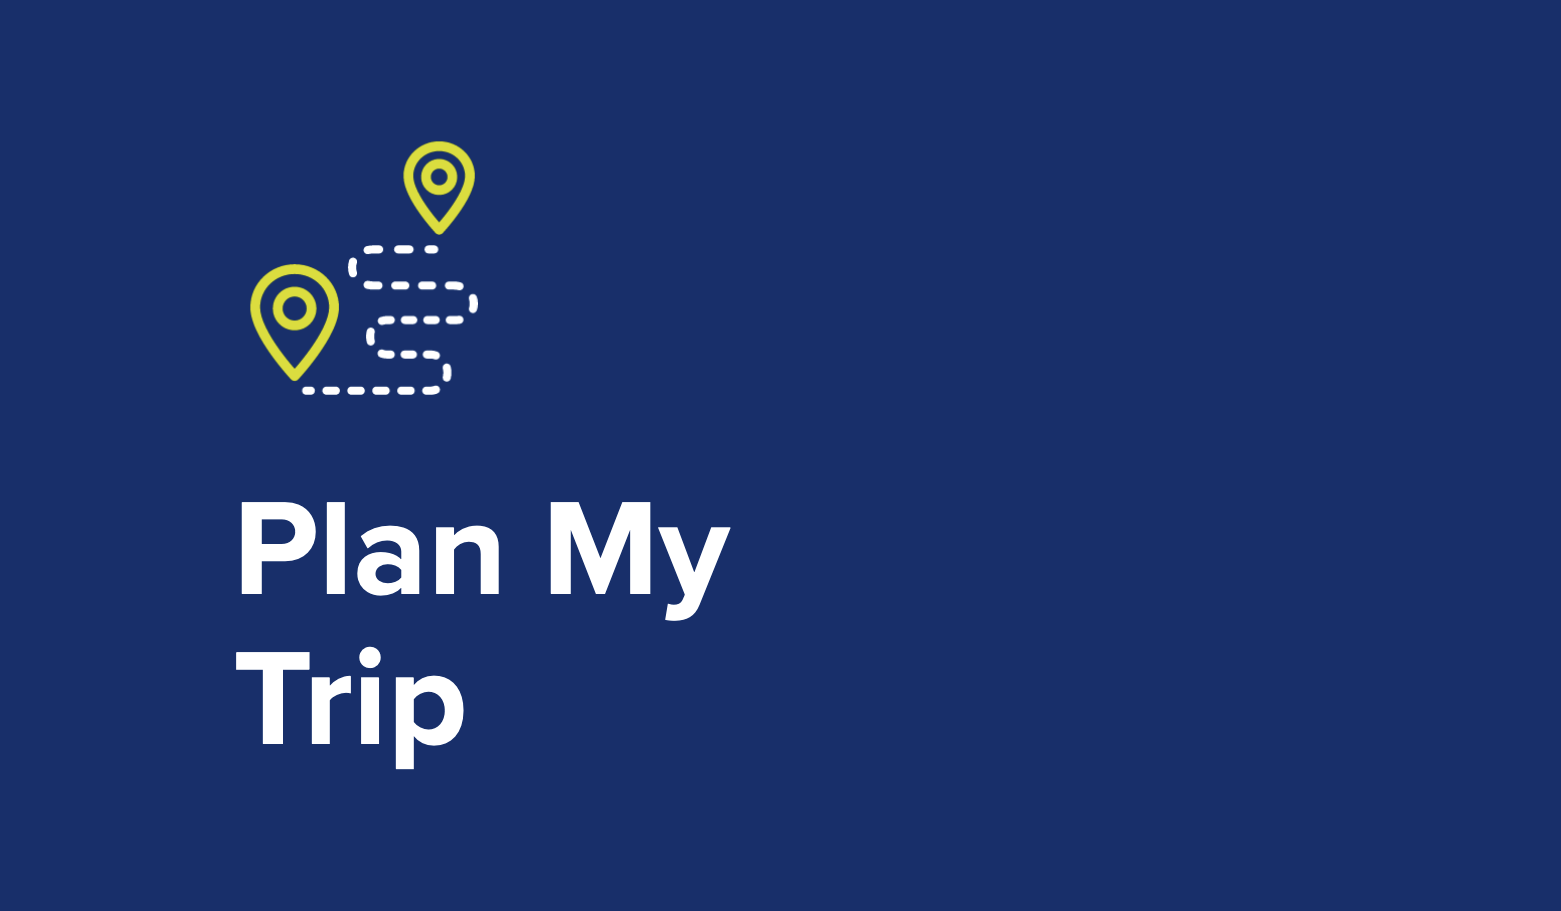 Graphic for Plan My Trip